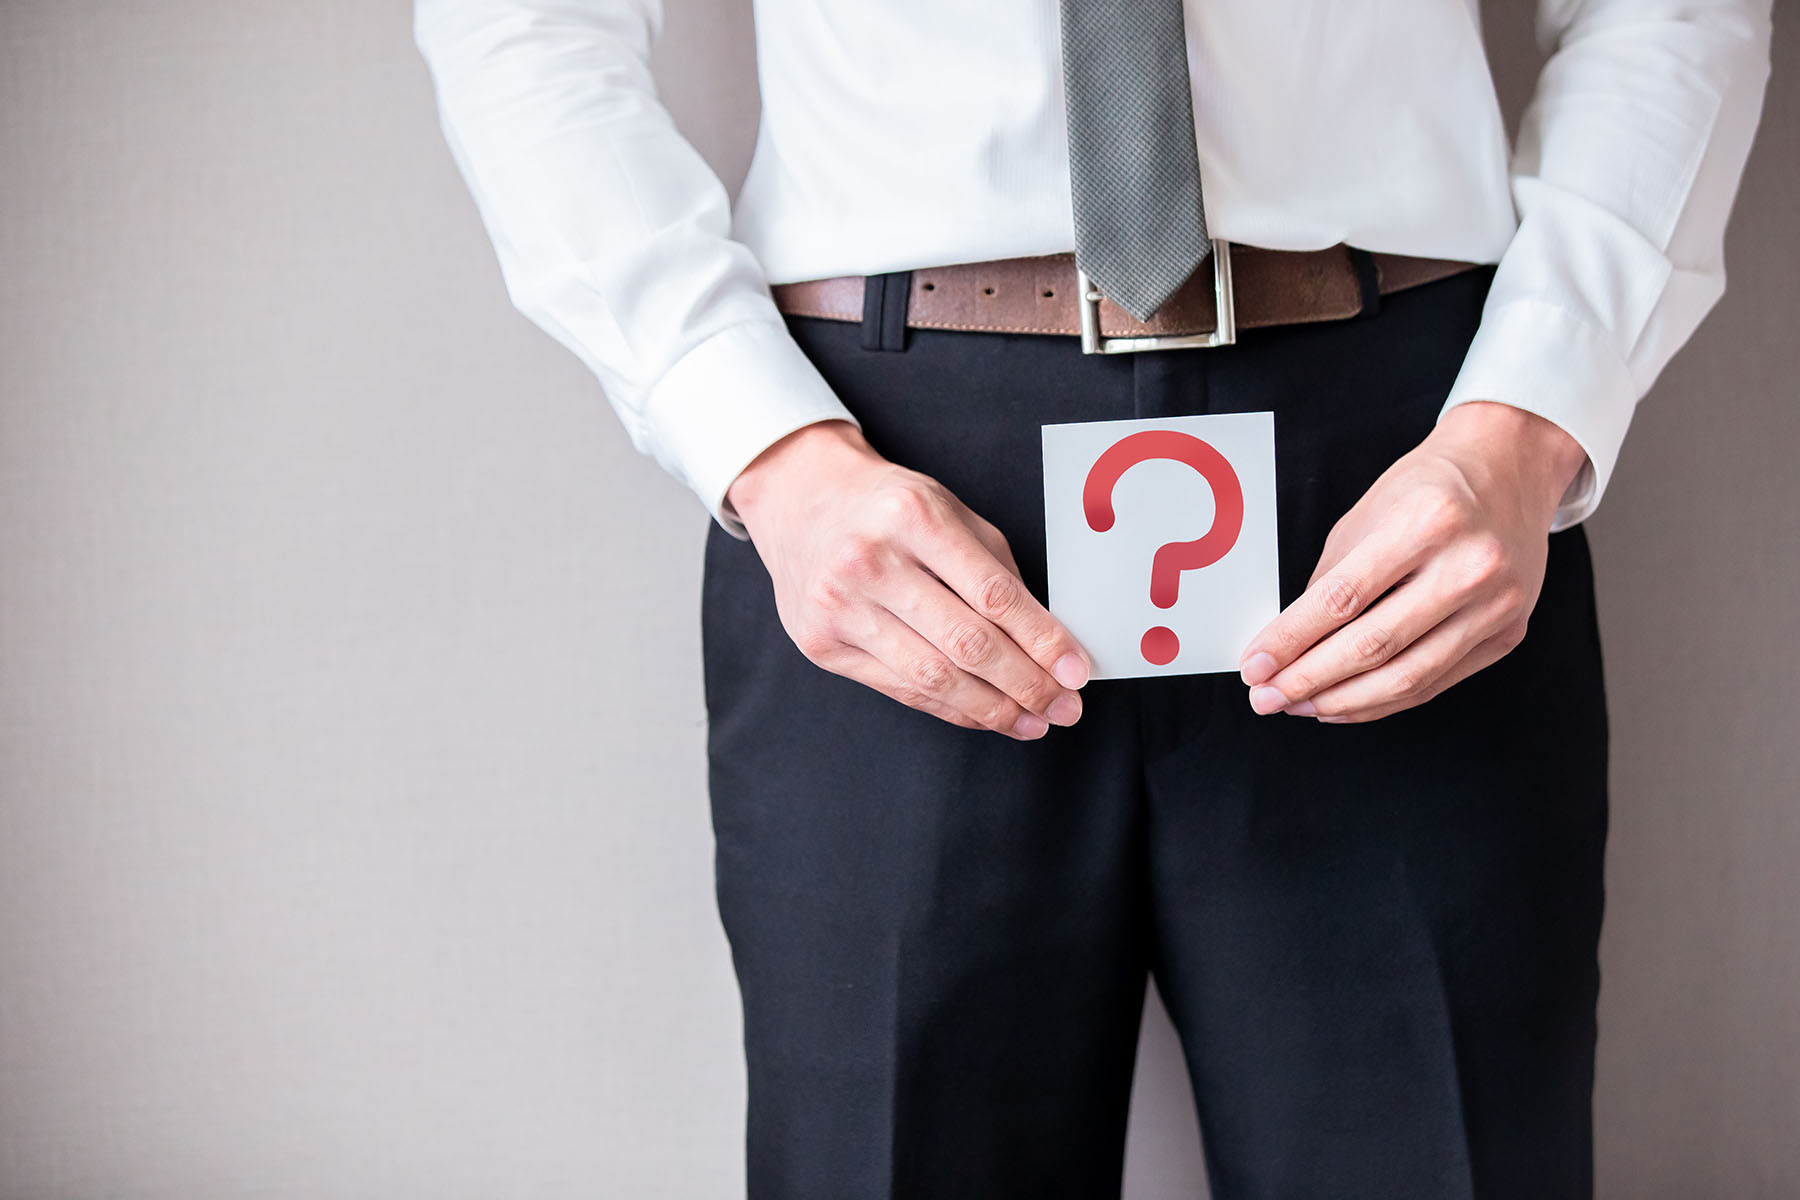 Man in business attire holds question mark sign over his pelvic area